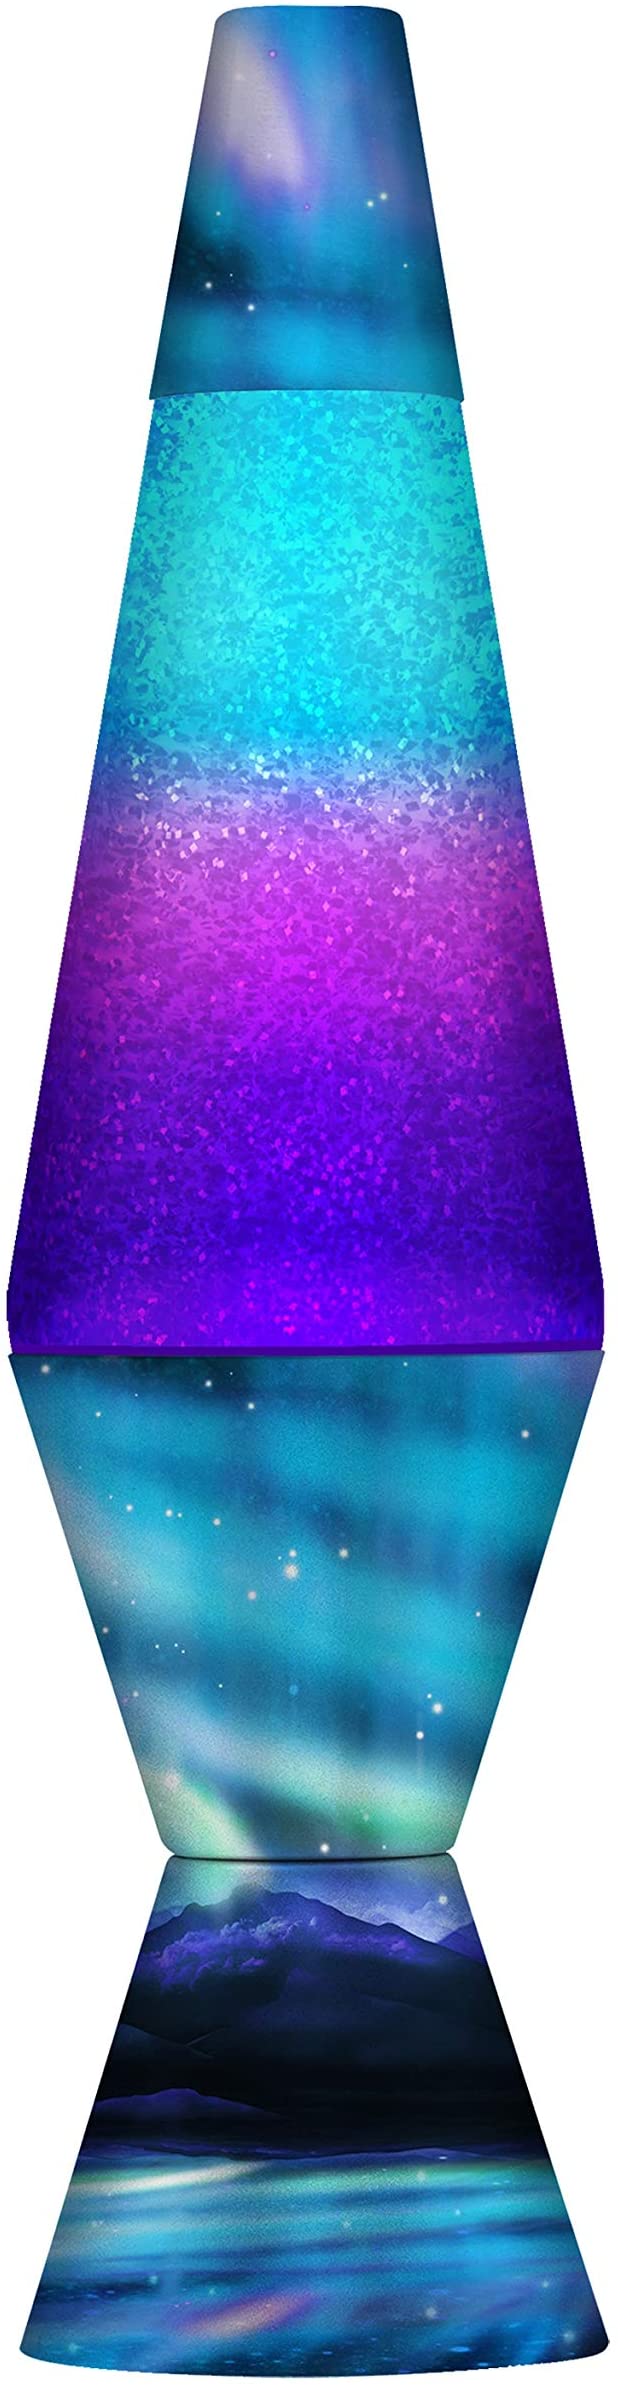 Lava The Original 2160 14.5-Inch Colormax Lamp with Northern Lights Decal Base